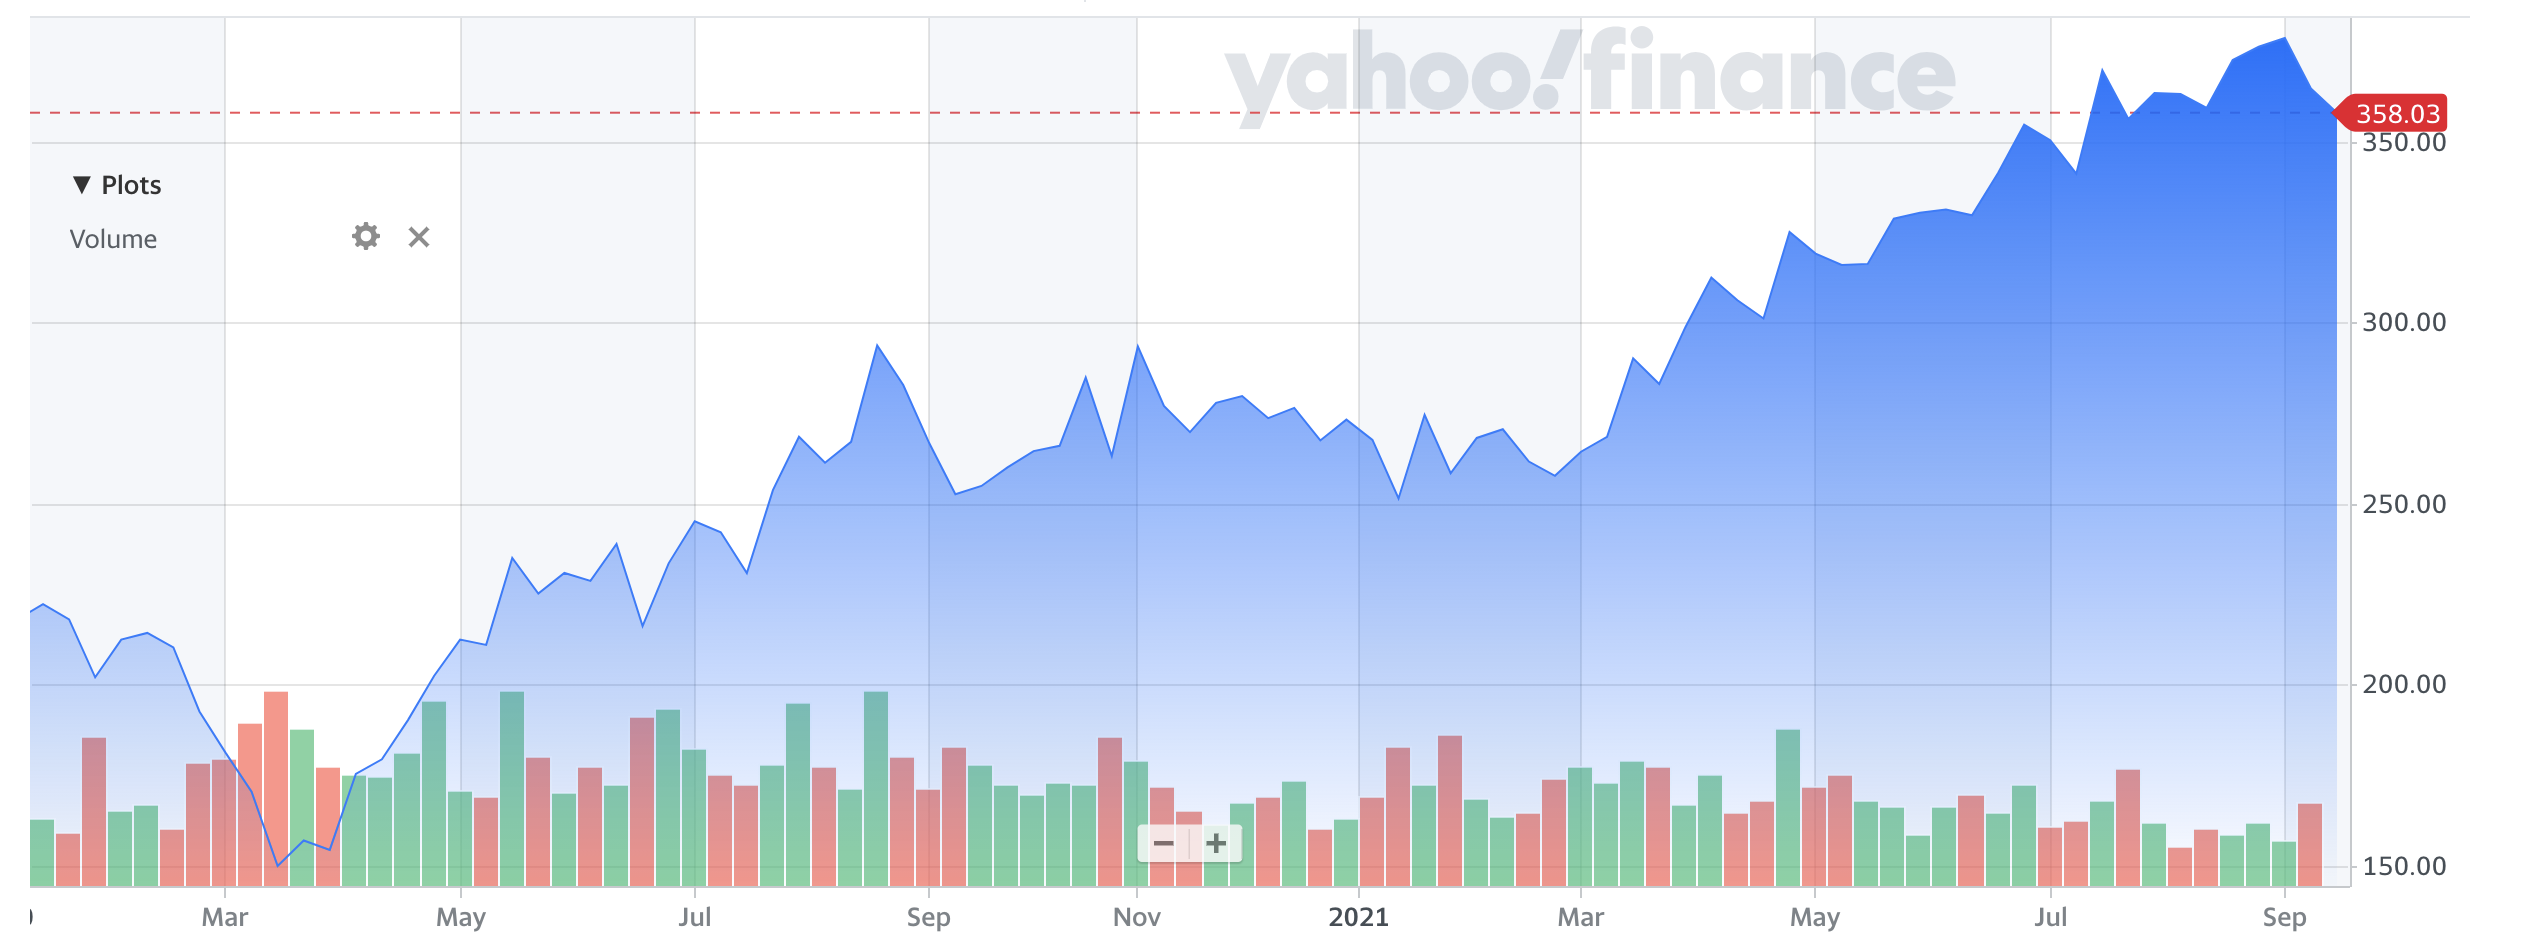 Facebook share price during the COVID pandemic